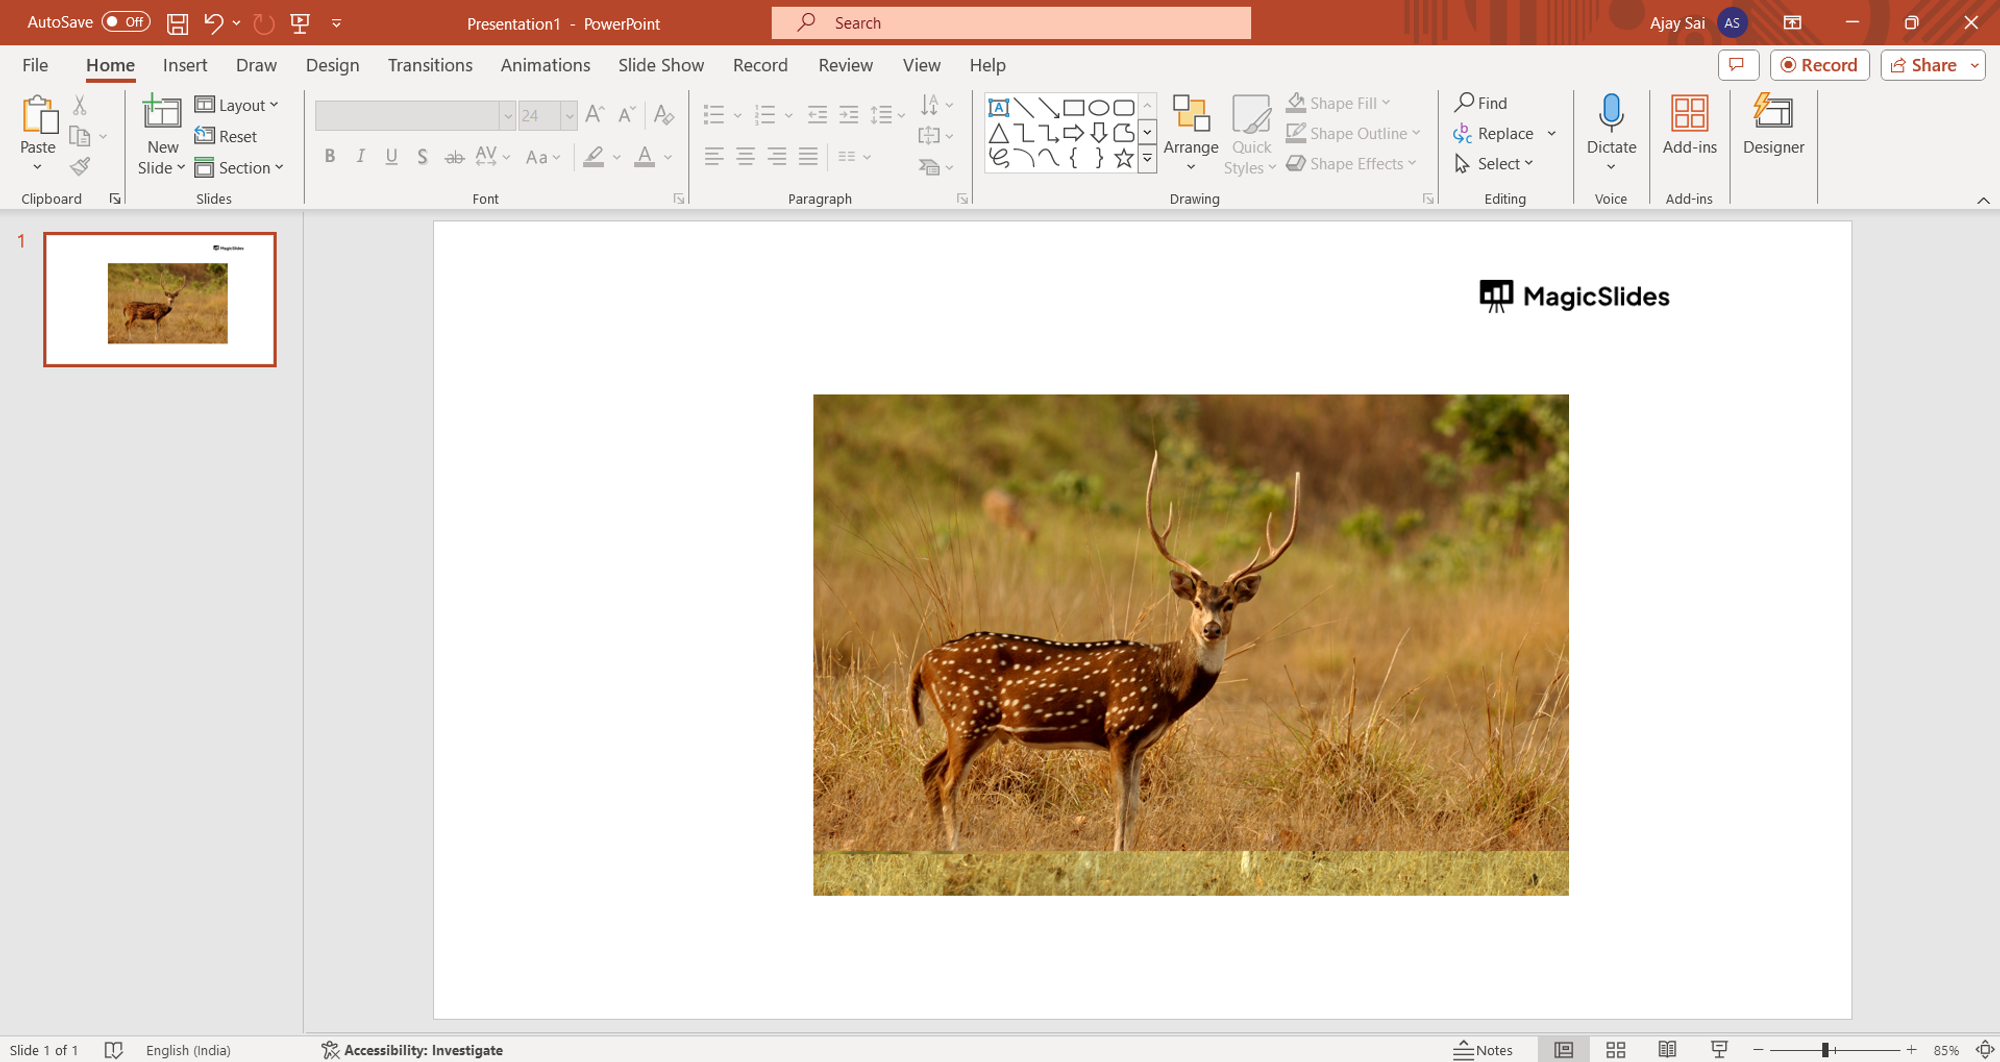 How to Make an Image Background Transparent in PowerPoint